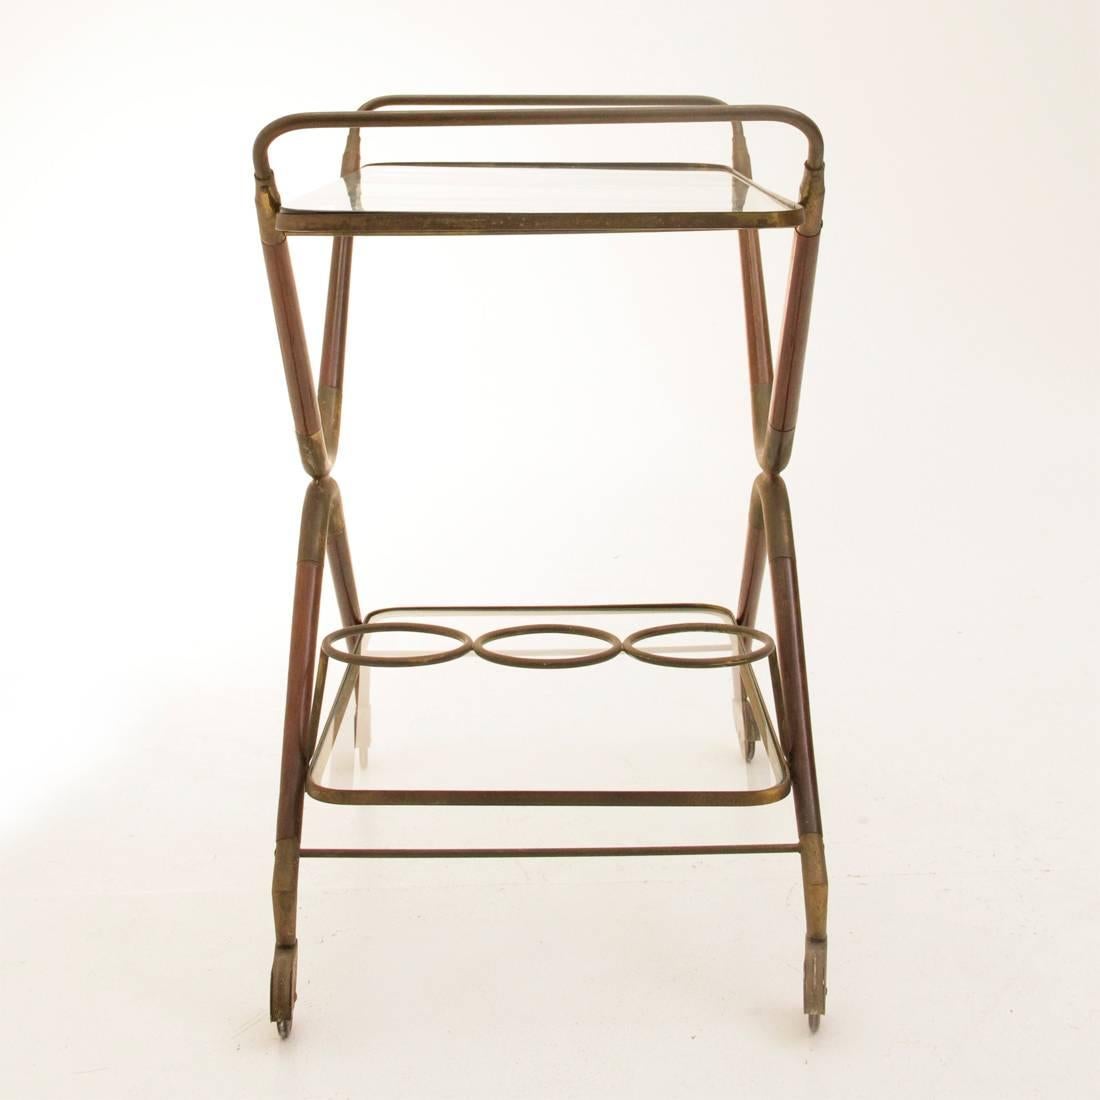 This lunch trolley designed by Cesare Lacca in the 1950s features a double C-structure in inverted brass and lacquered wood, supporting two shelves with brass edging, and a glass top, all sitting on brass and rubber wheels.